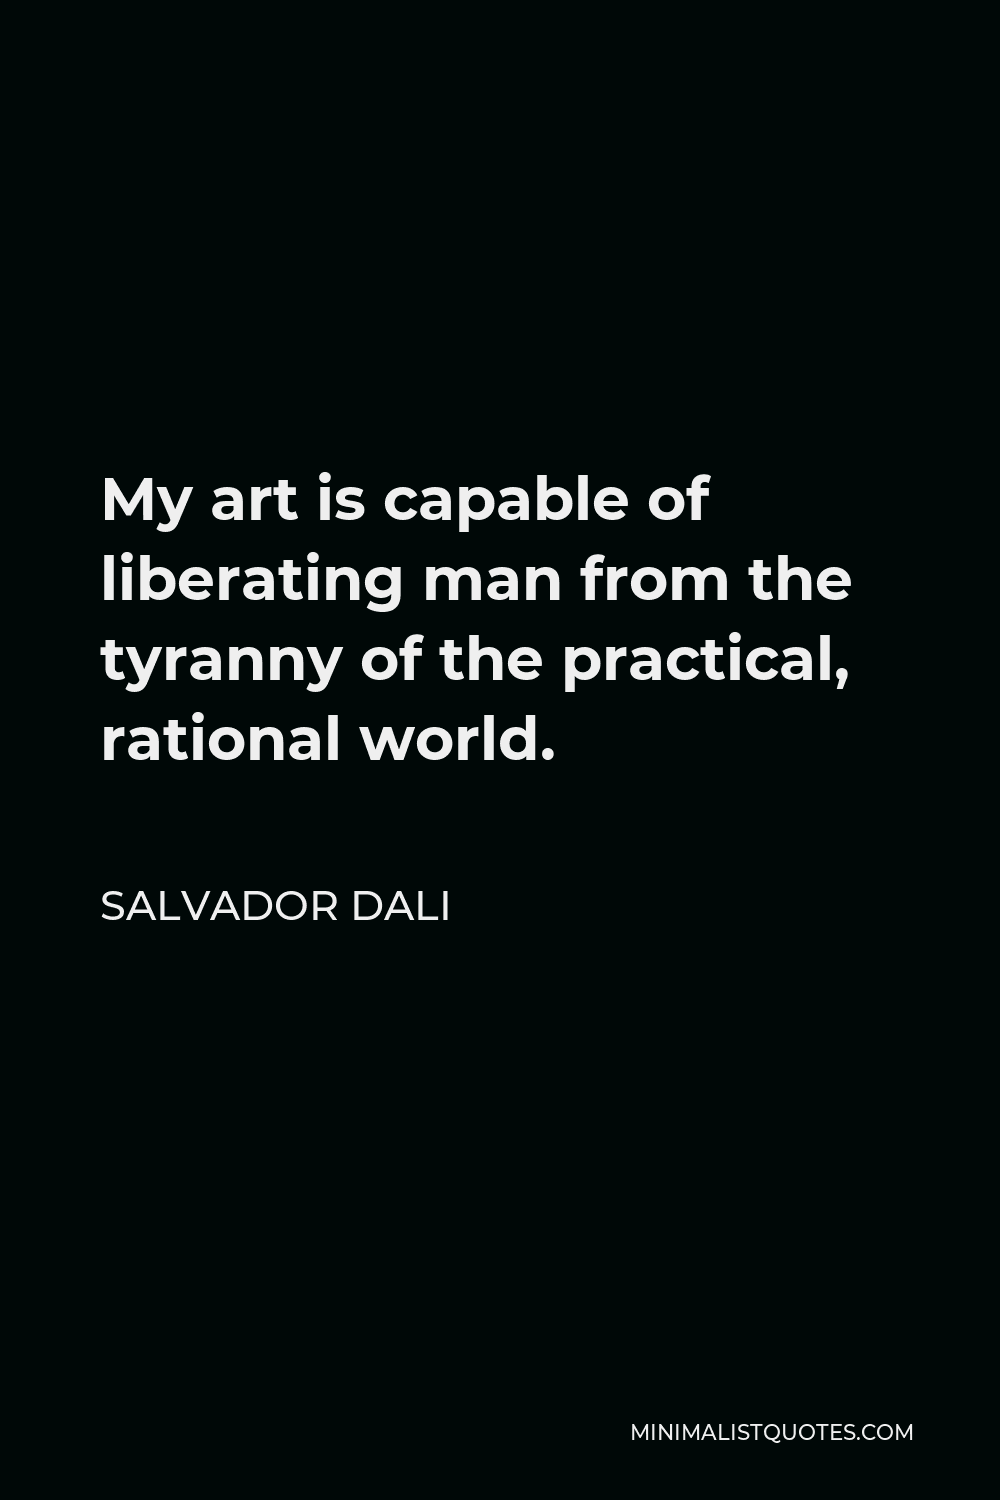 Salvador Dali Quote - My art is capable of liberating man from the tyranny of the practical, rational world.